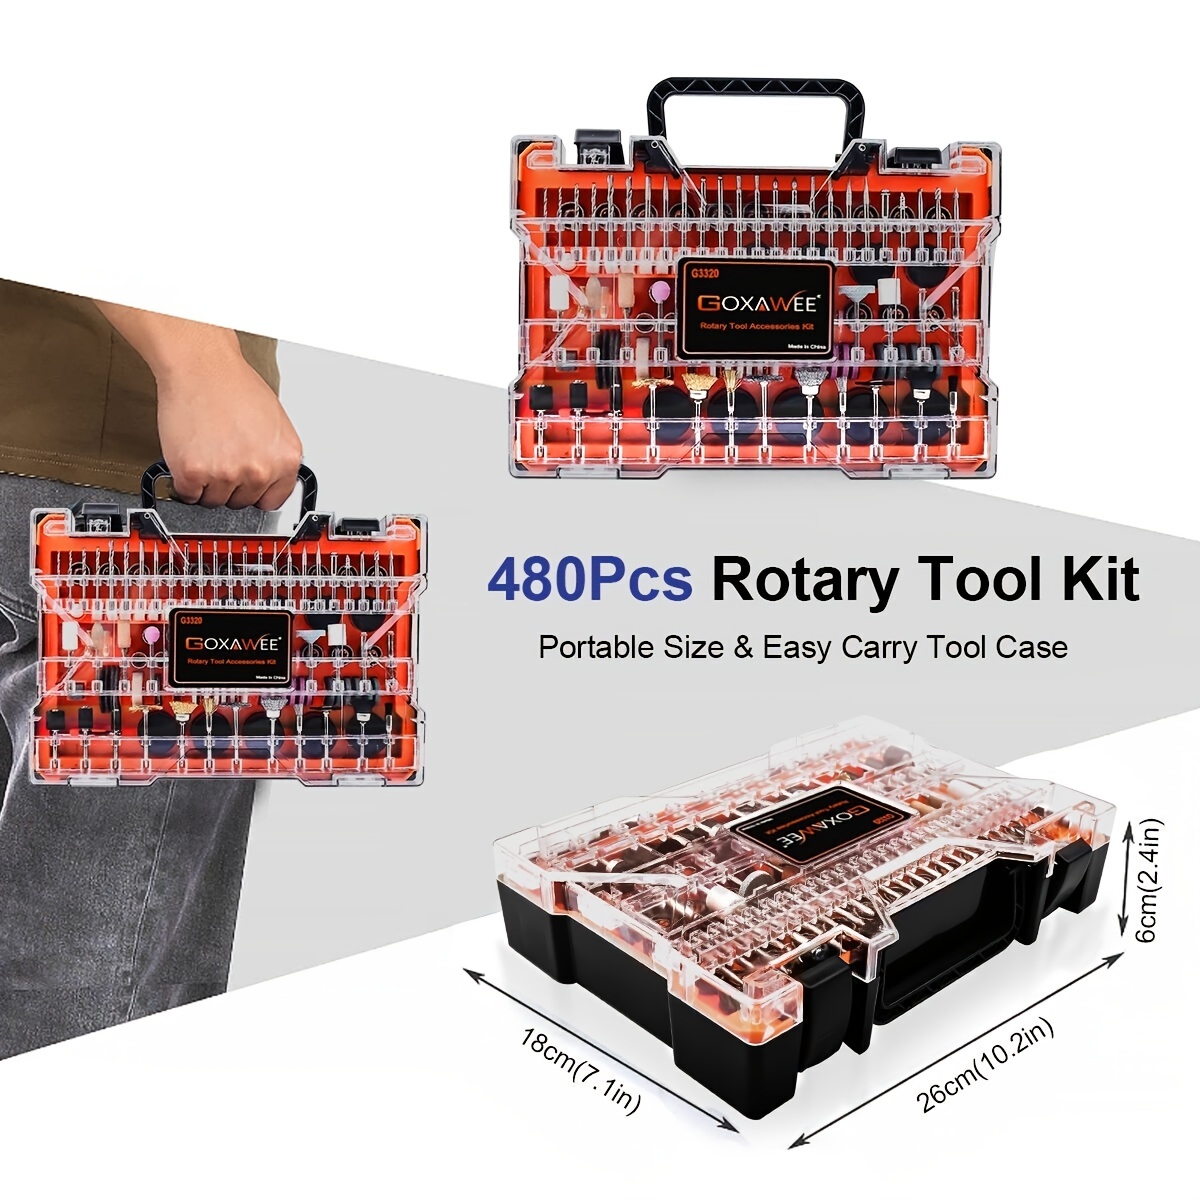 480pcs Rotary Tool Accessories Kit, Goxawee 1/8 inch Shank Rotary Tool Accessory Set, Multi Purpose Universal Kit for Cutting, Drilling, Grinding